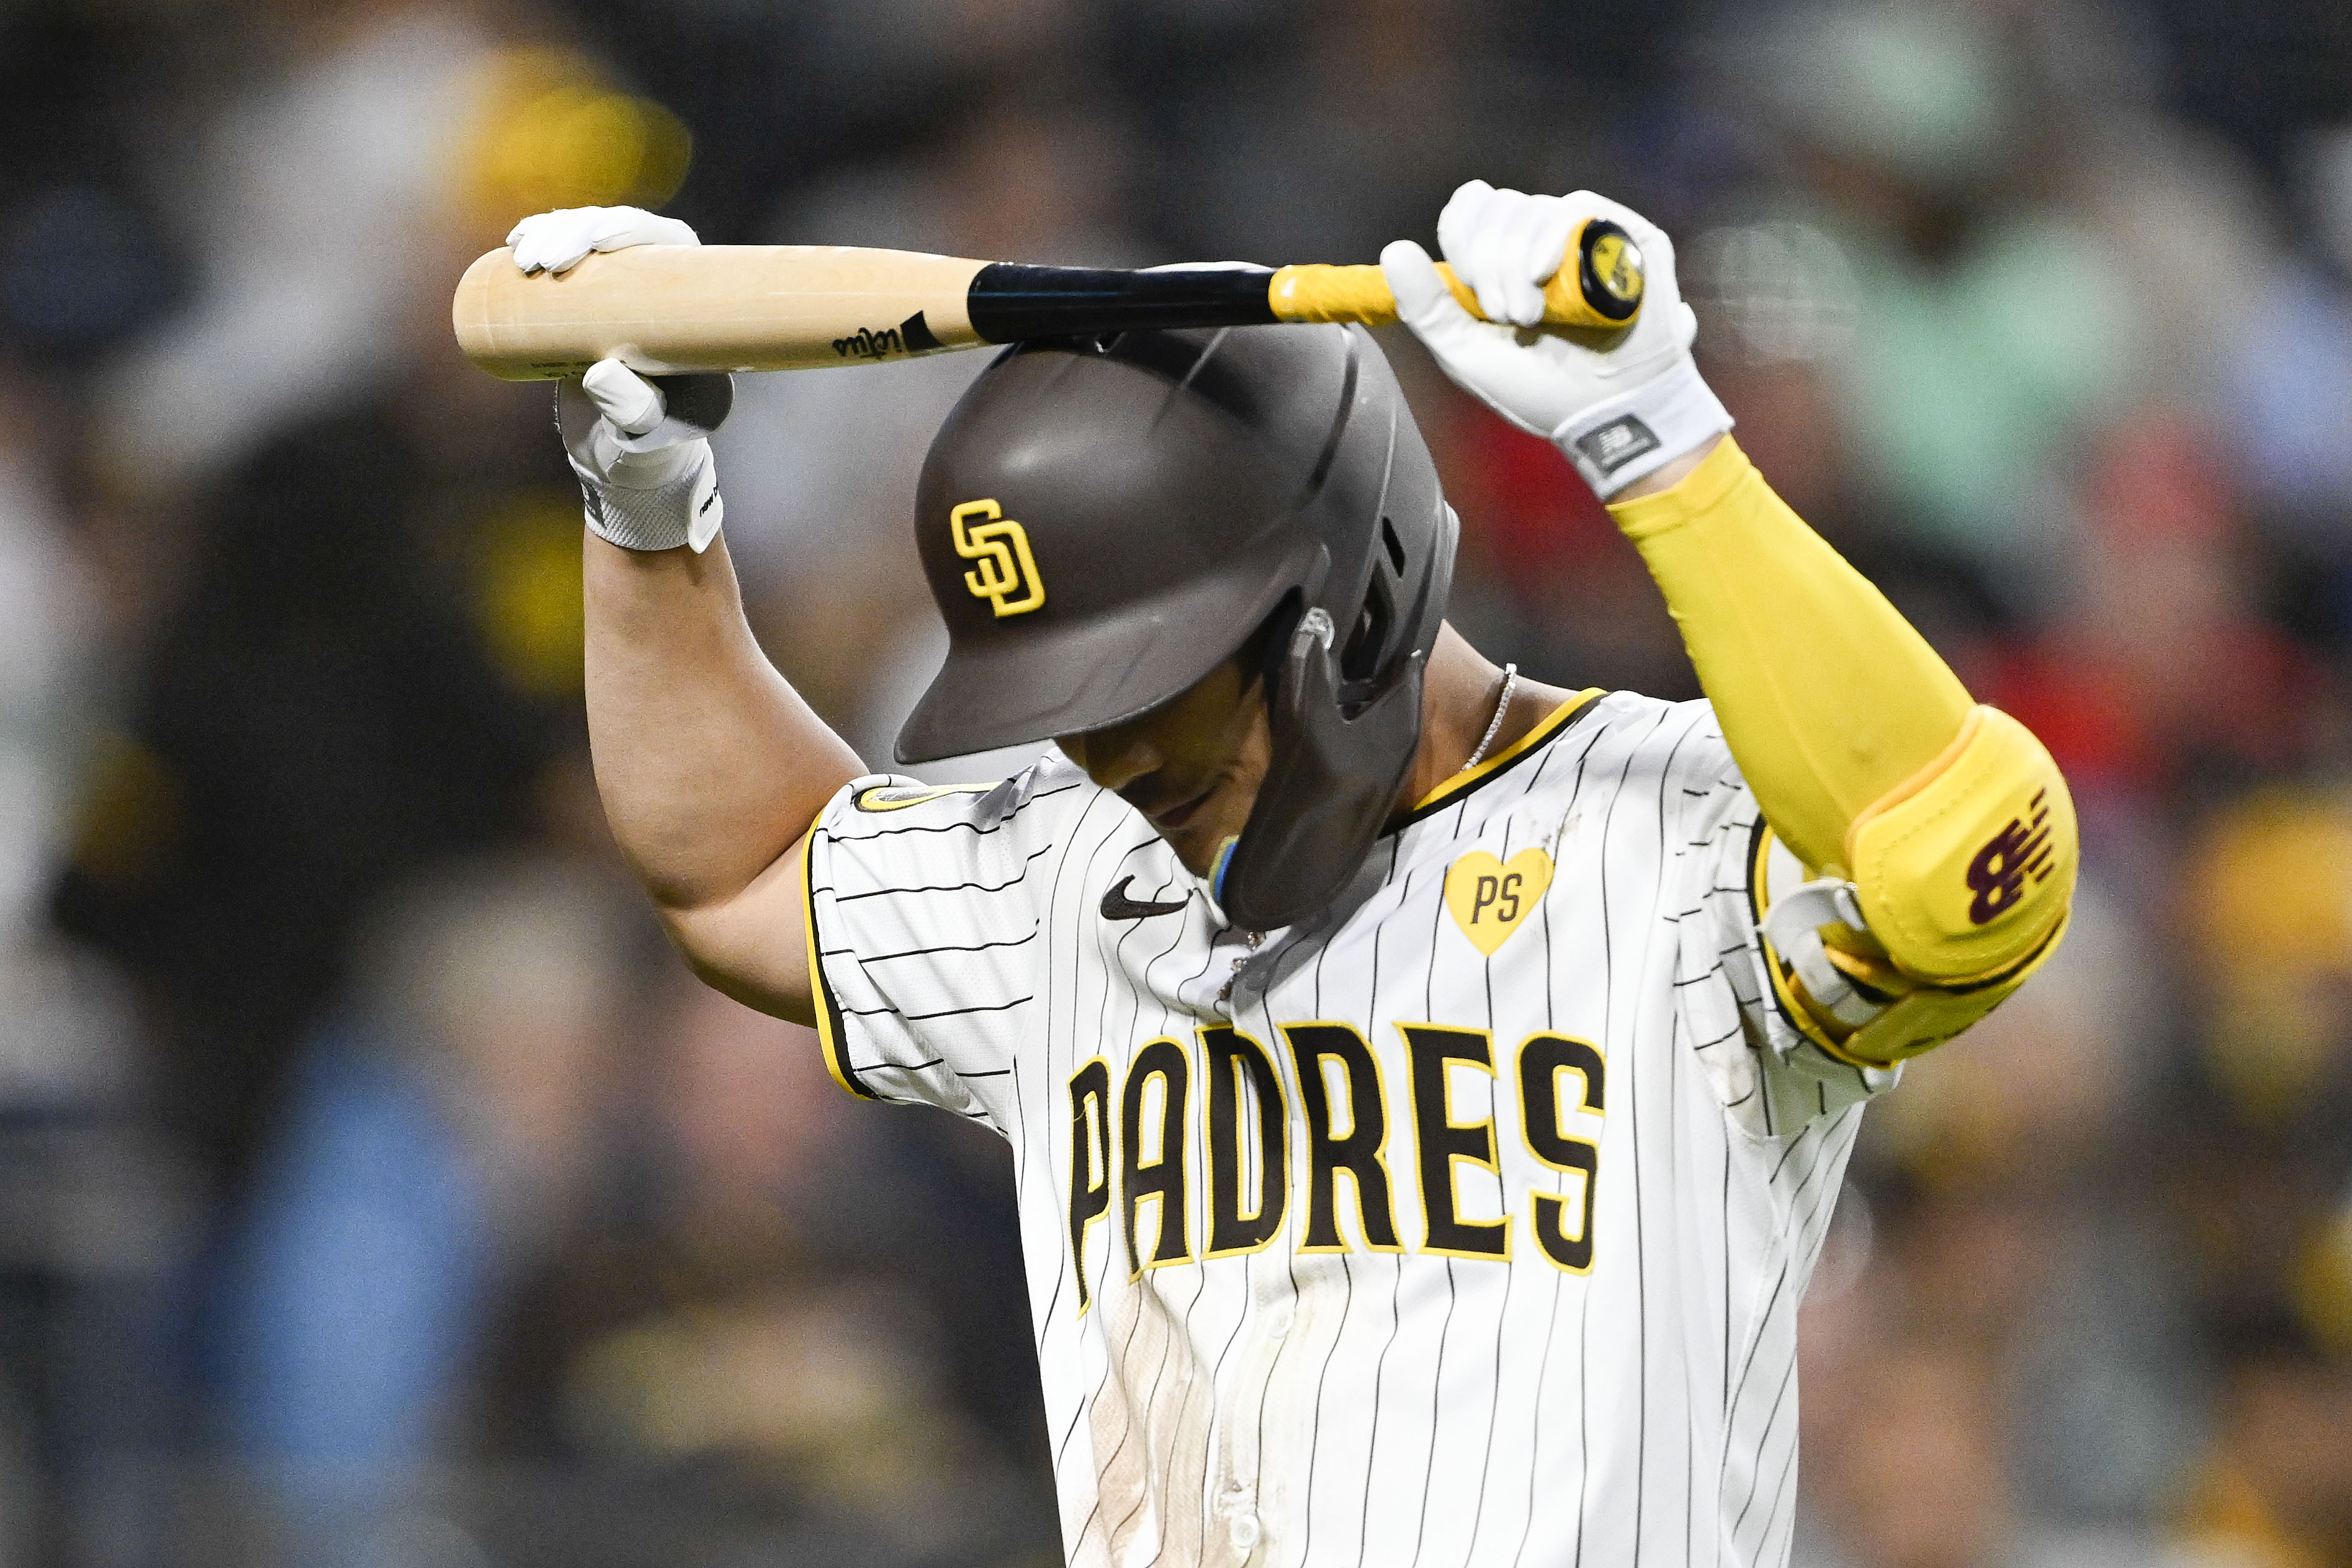 San Diego Padres flummoxed by Phillies again at Petco Park